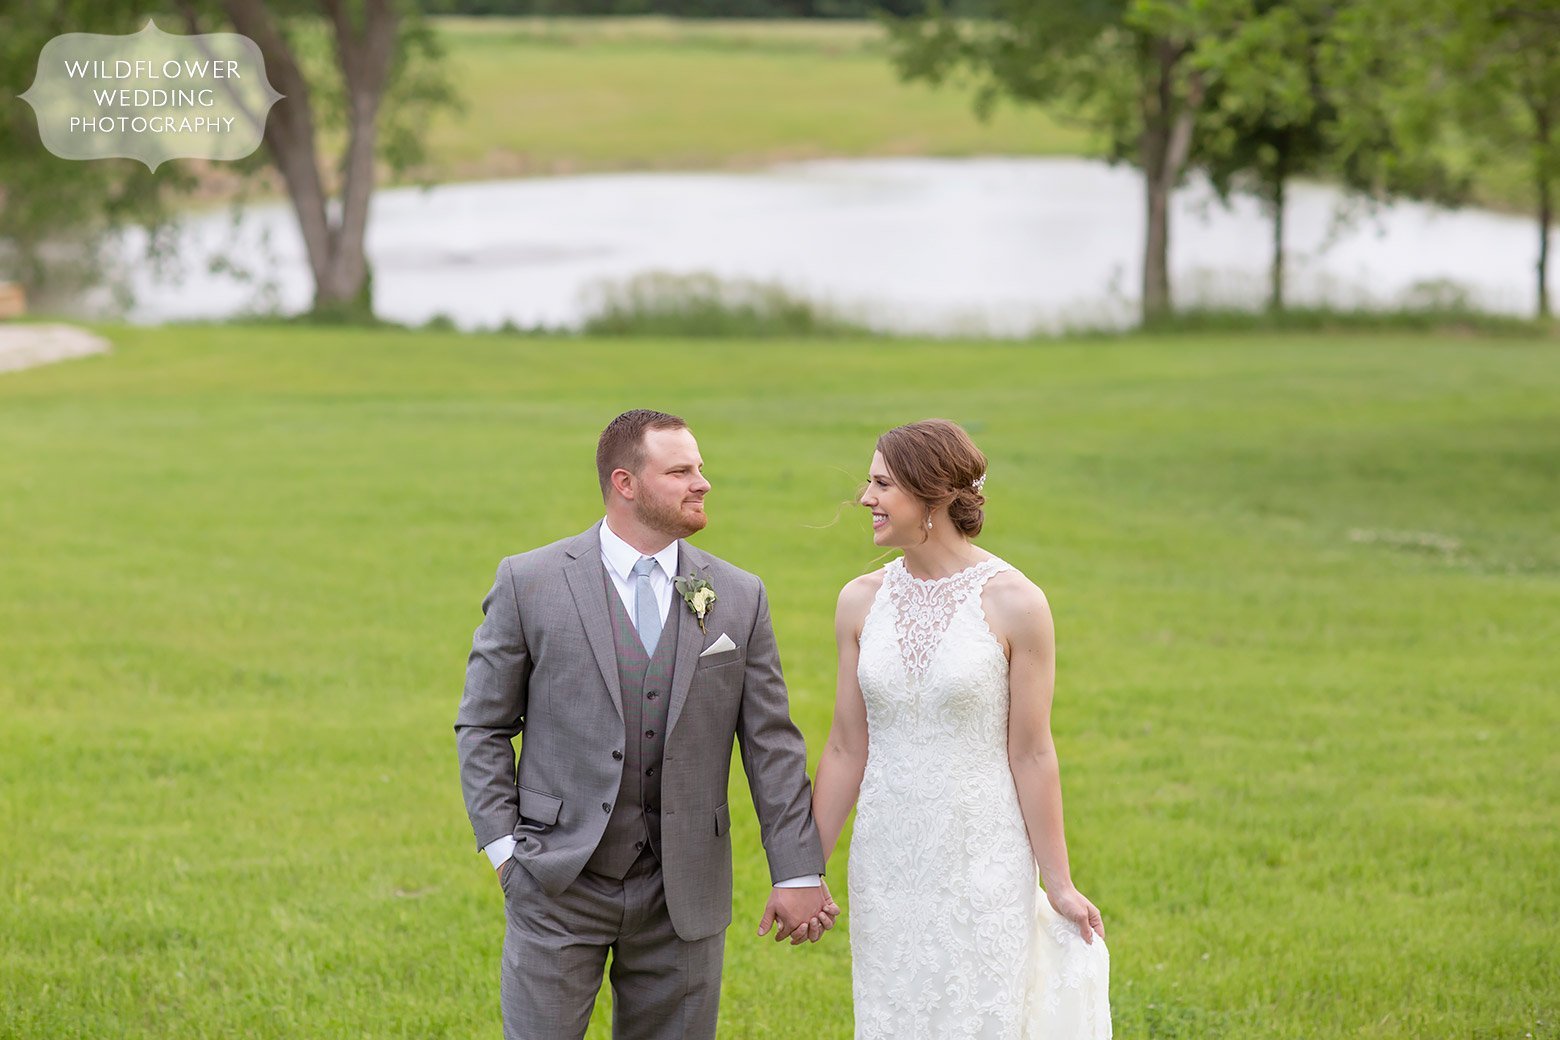 Bride and groom in front of pond at Cooper's Ridge outdoor wedding venue in mid-MO.